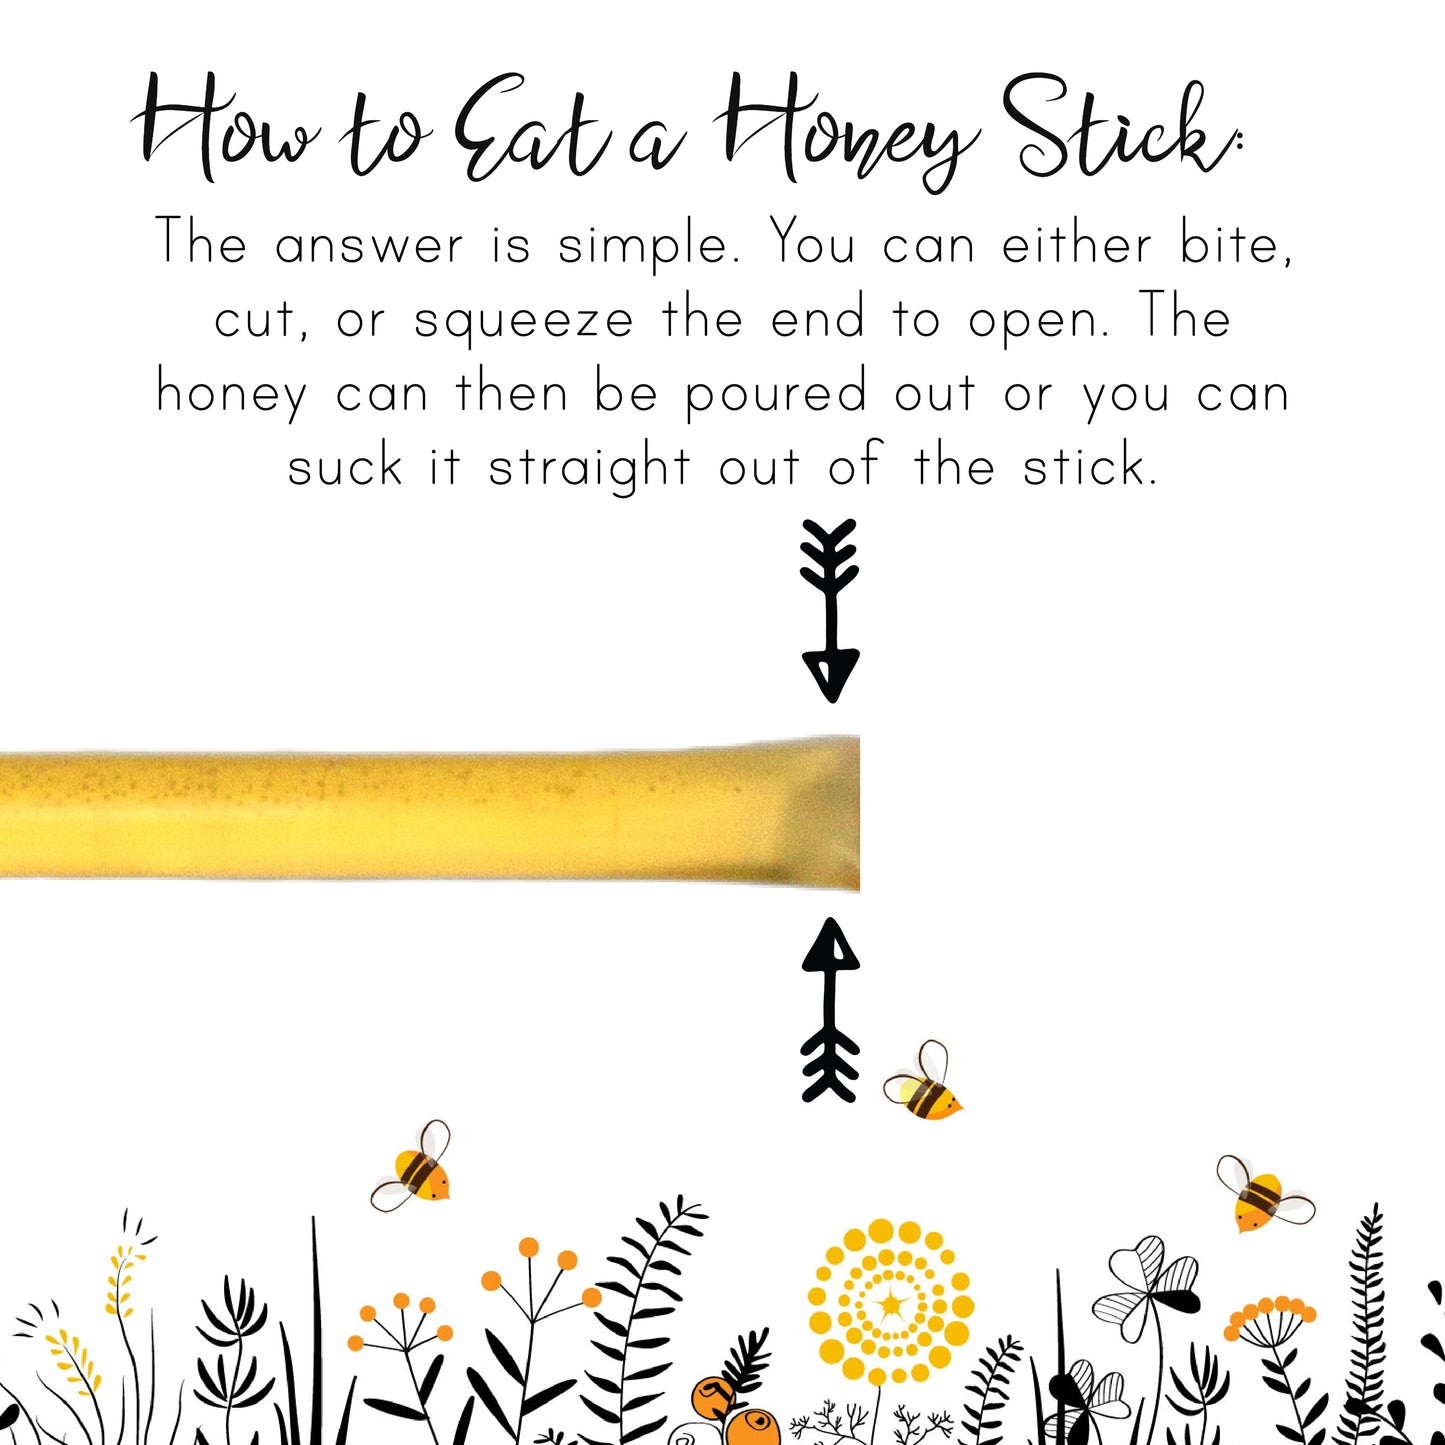 Honey Sticks Table Favors - Pack of 50 by Sister Bees